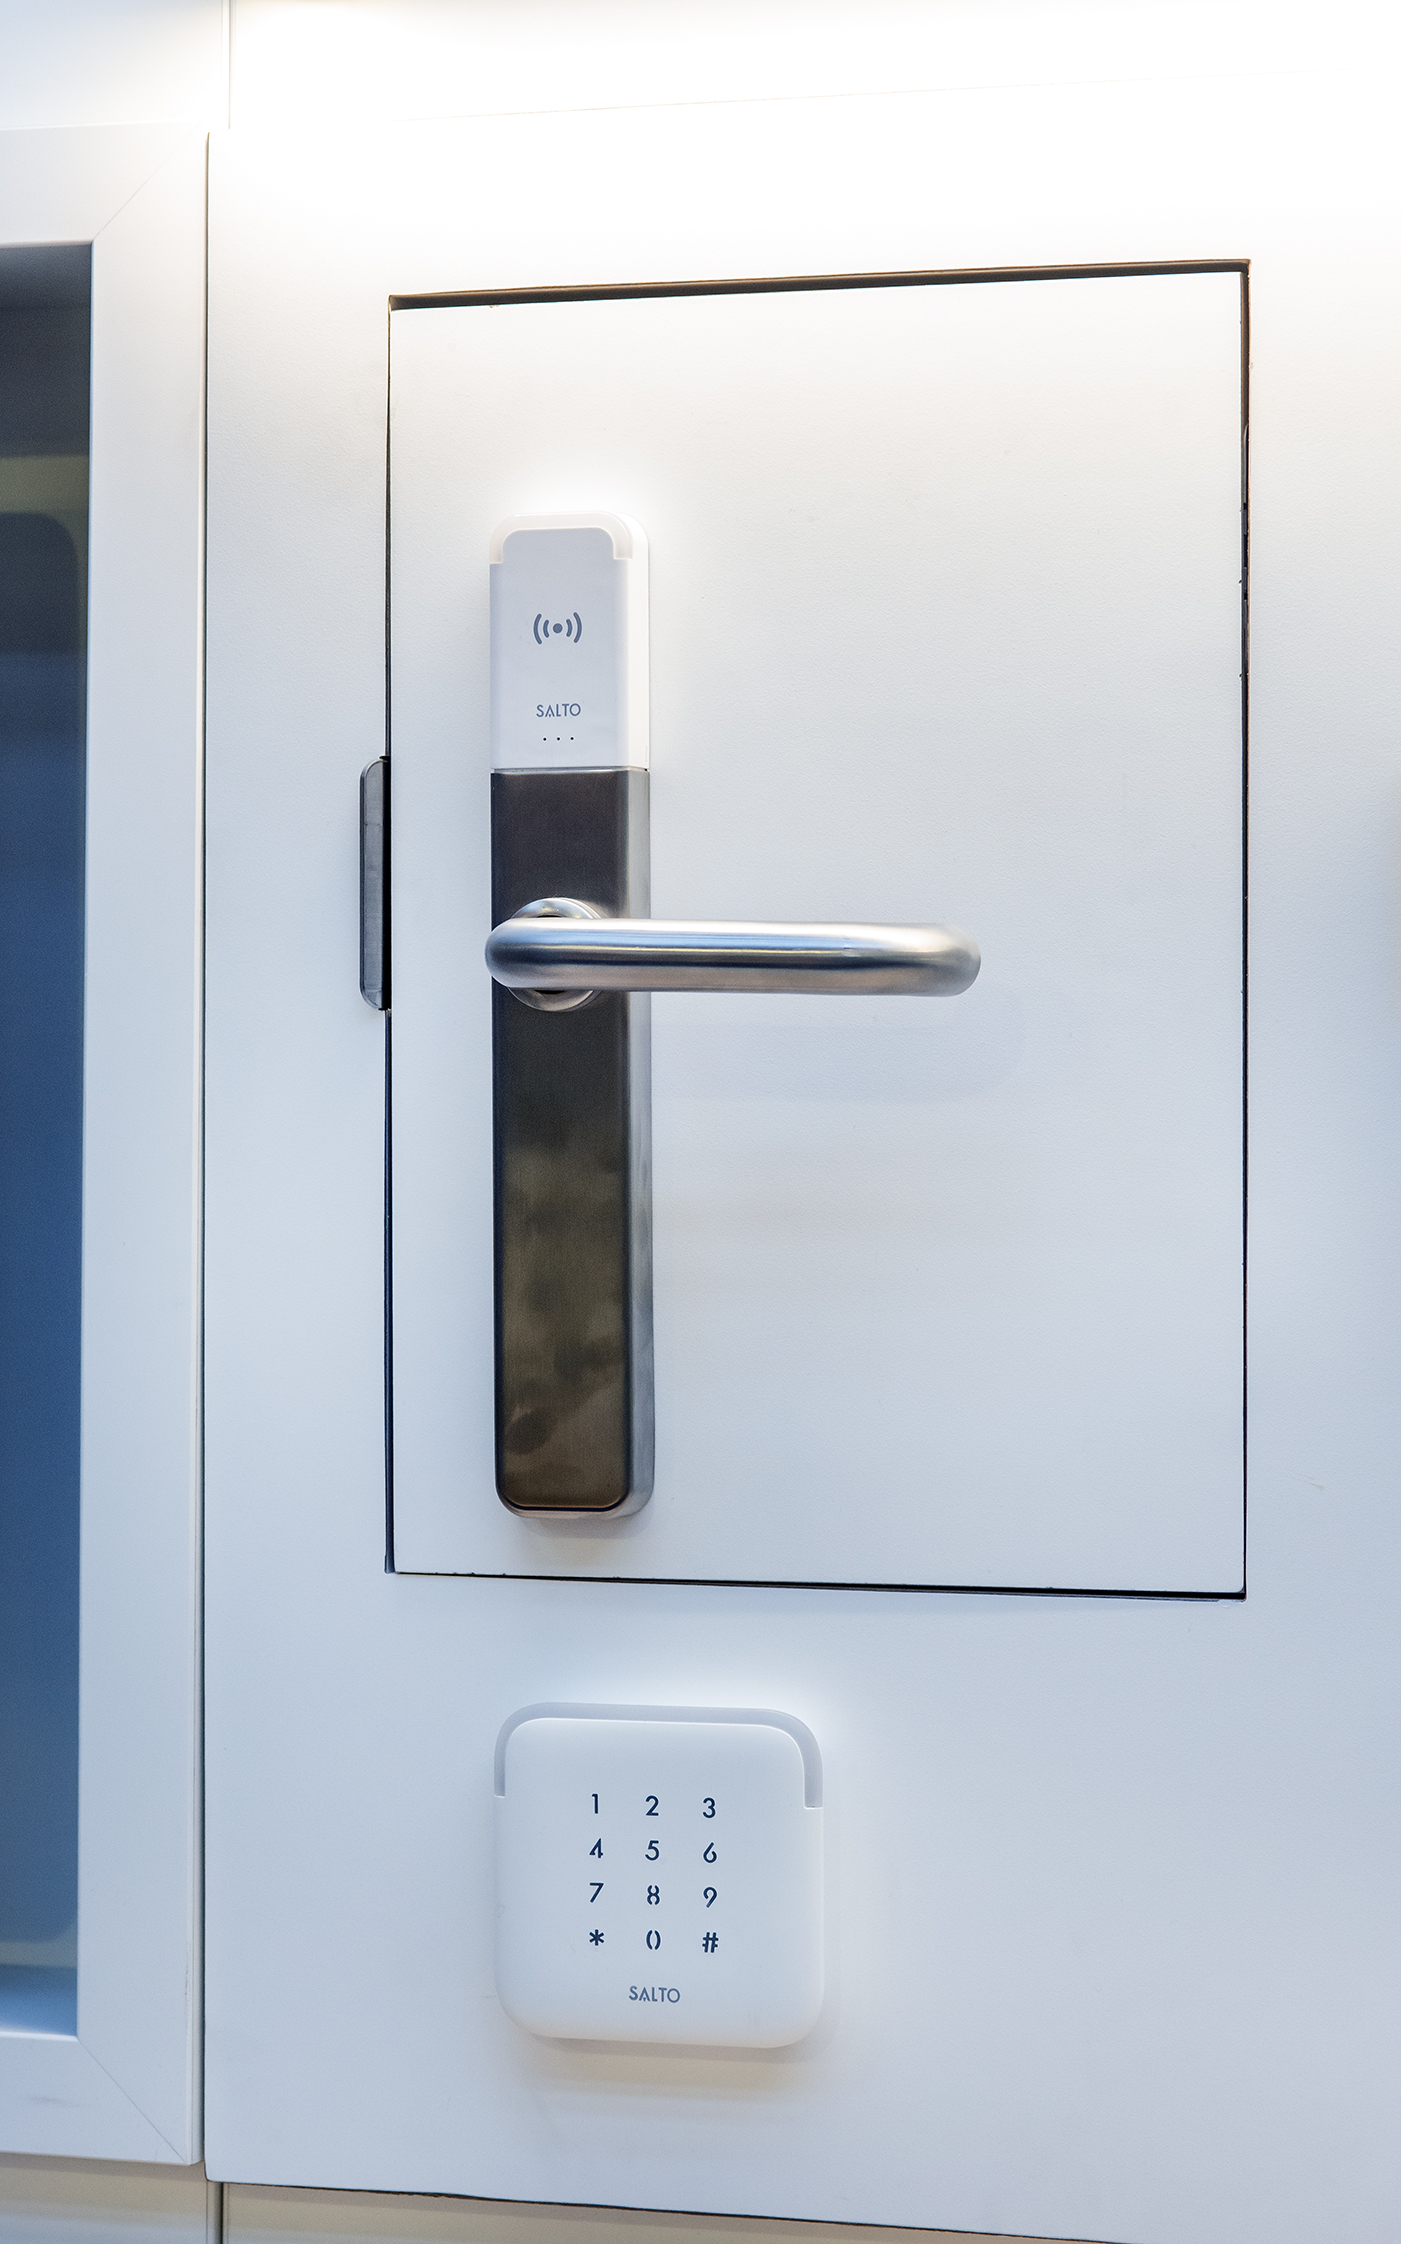 Security technology 10: Access control